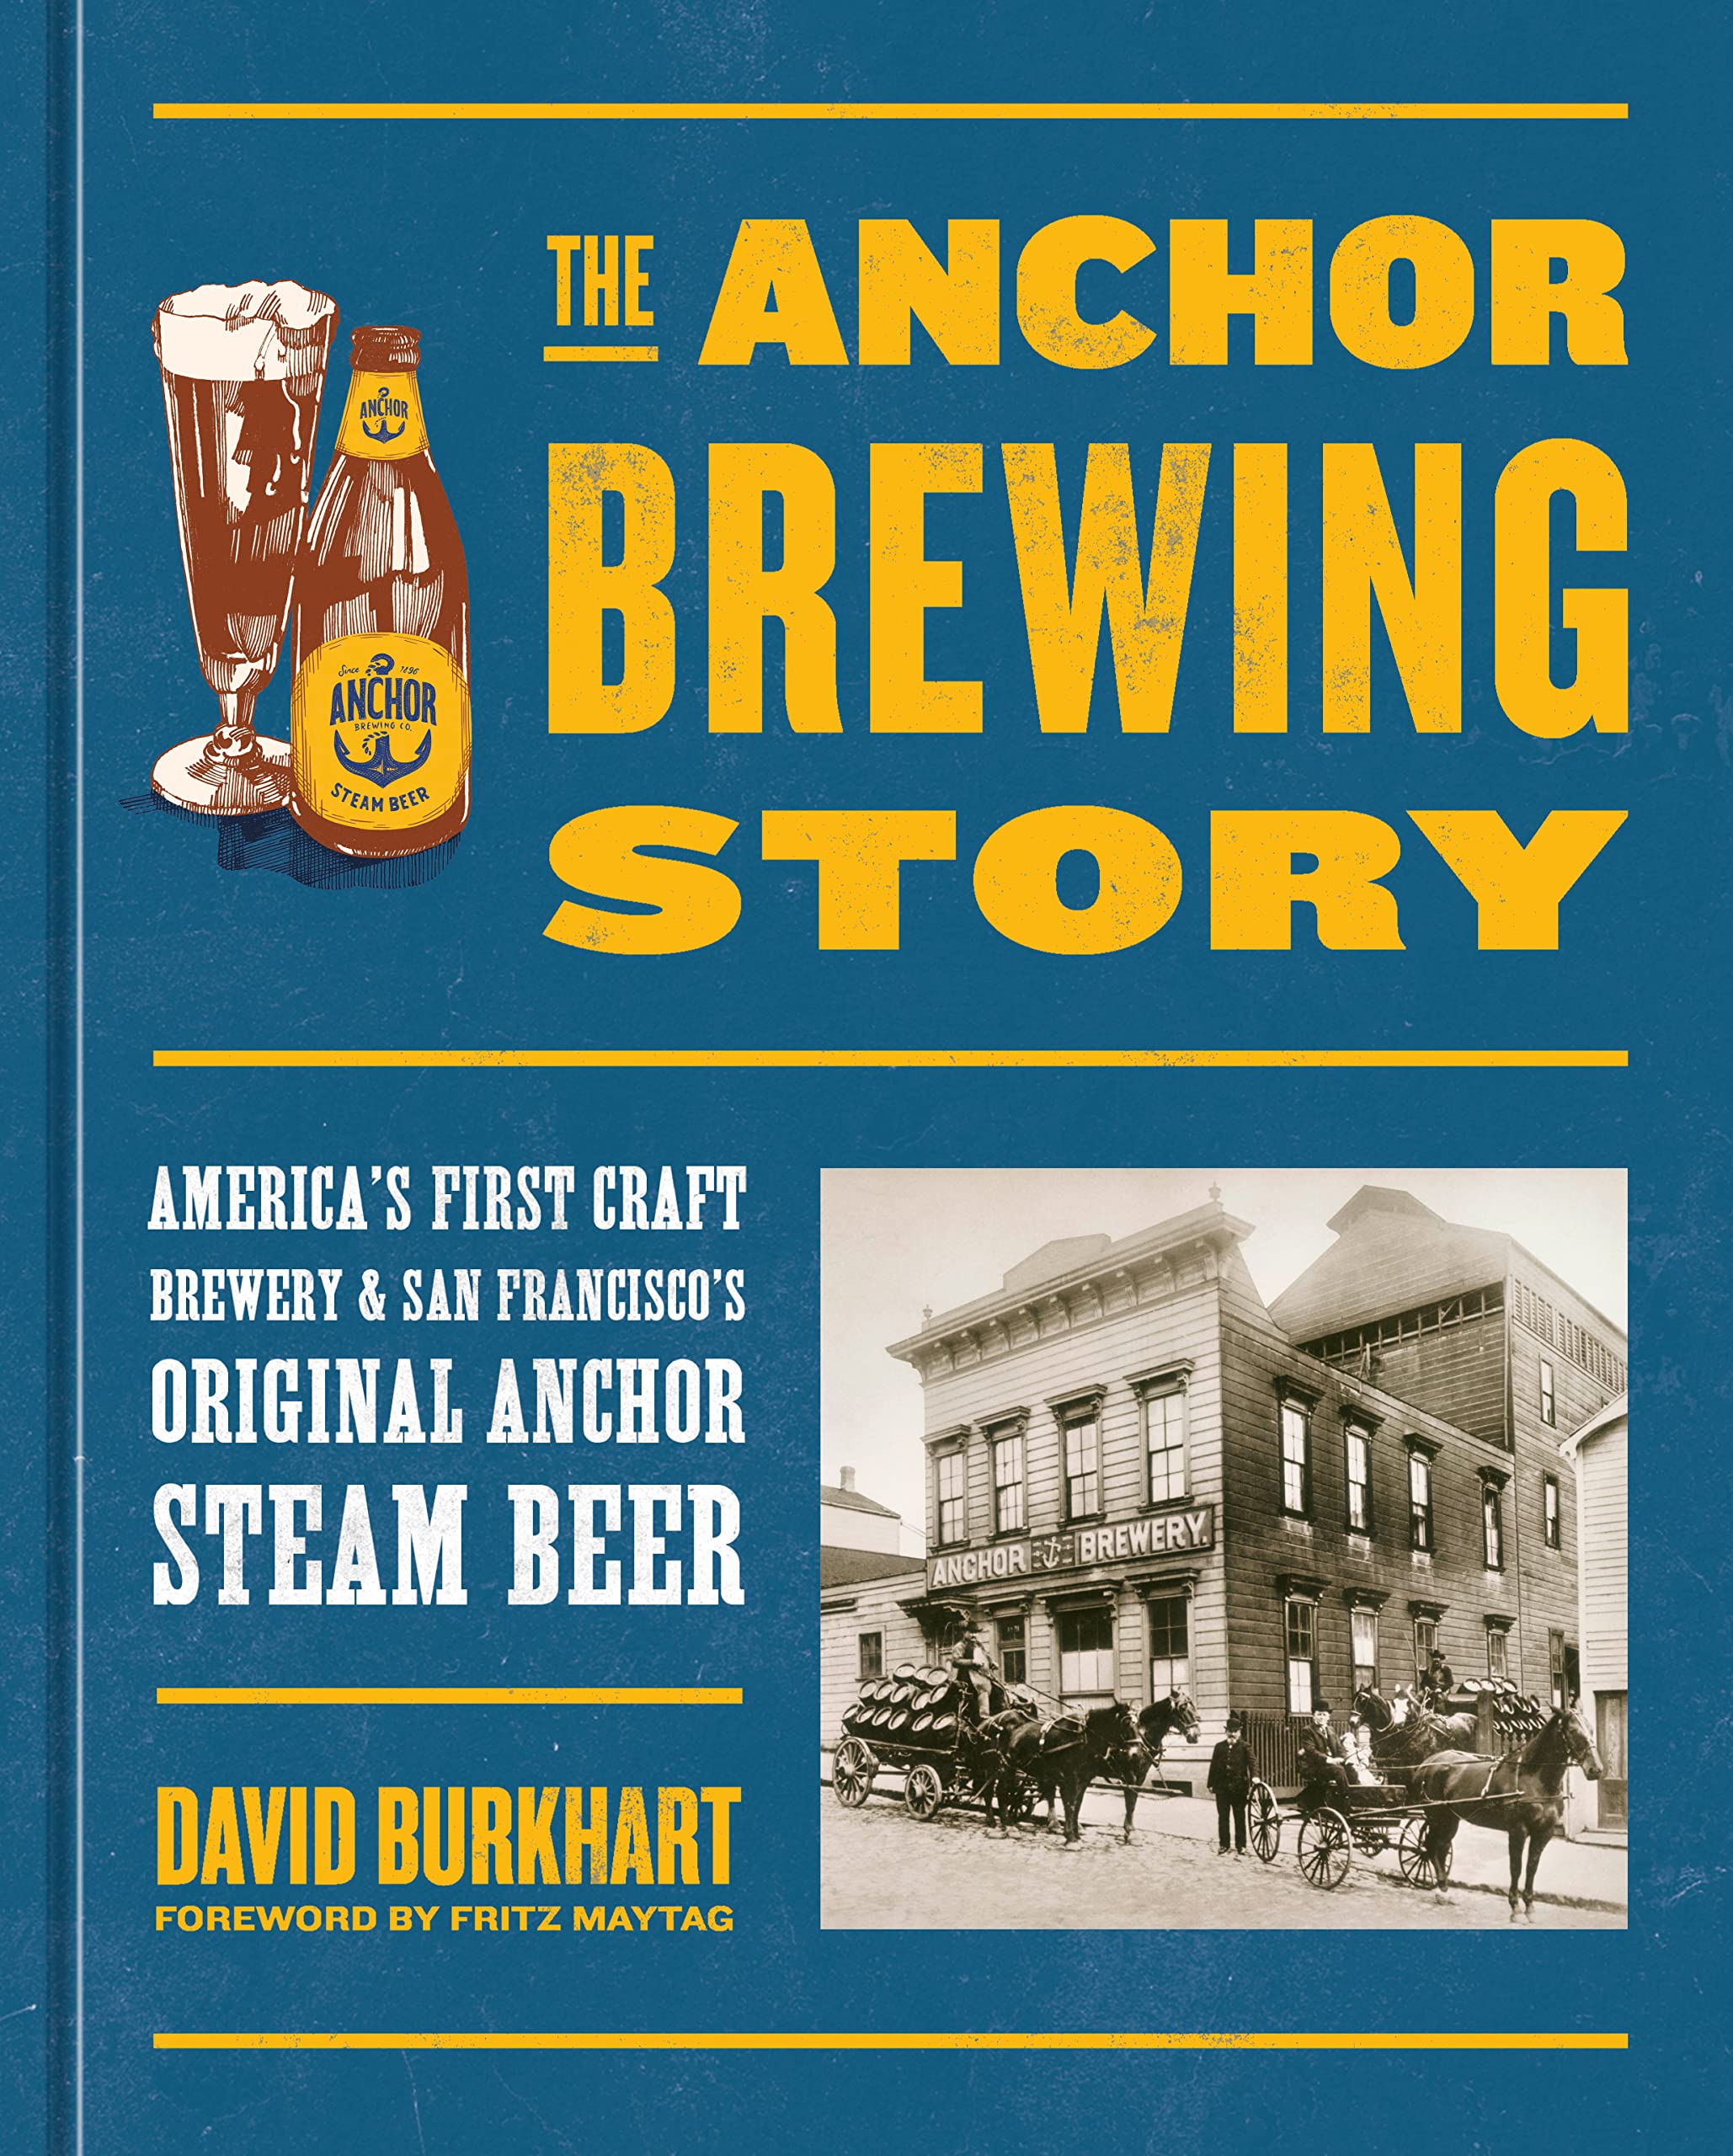 The Anchor Brewing Story: America's First Craft Brewery & San Francisco's Original Anchor Steam Beer (David Burkhart) *Signed*